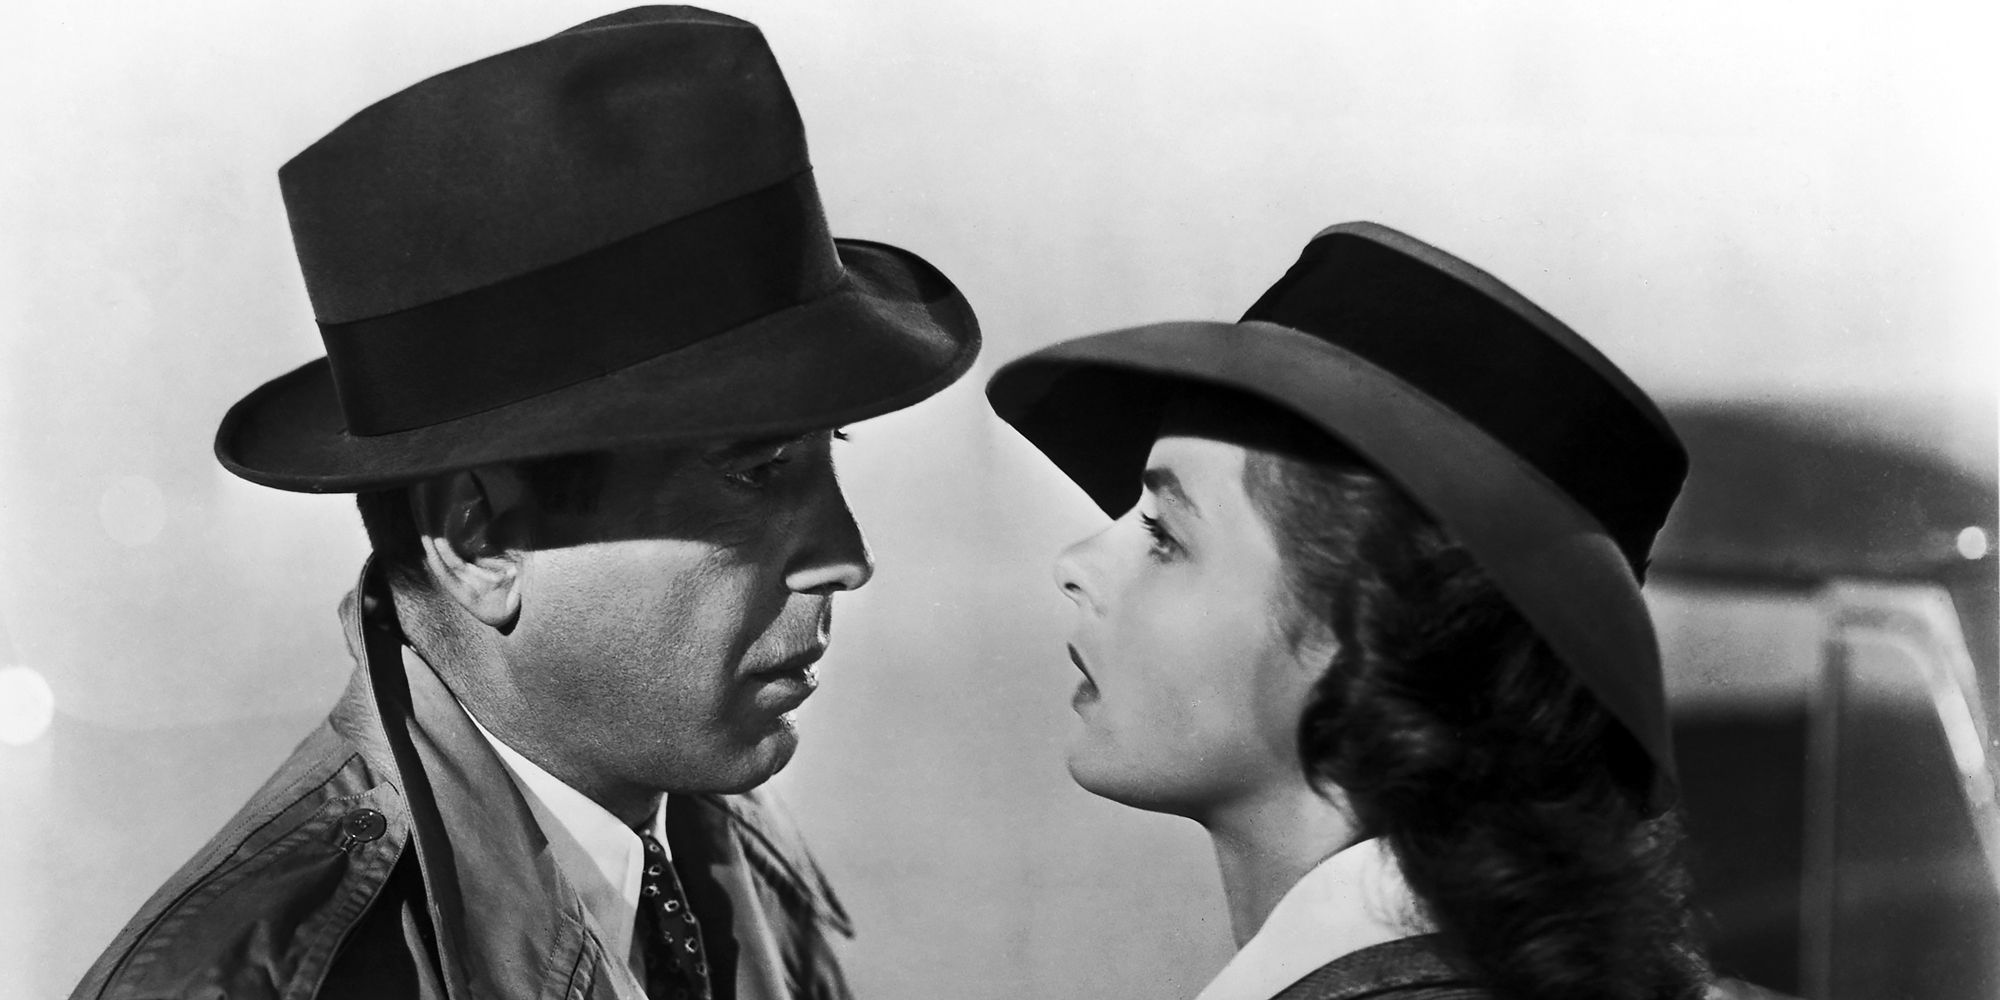 Humphrey Bogart as Rick Blaine and Ingrid Bergman as Ilsa Lund looking at each other in Casablanca